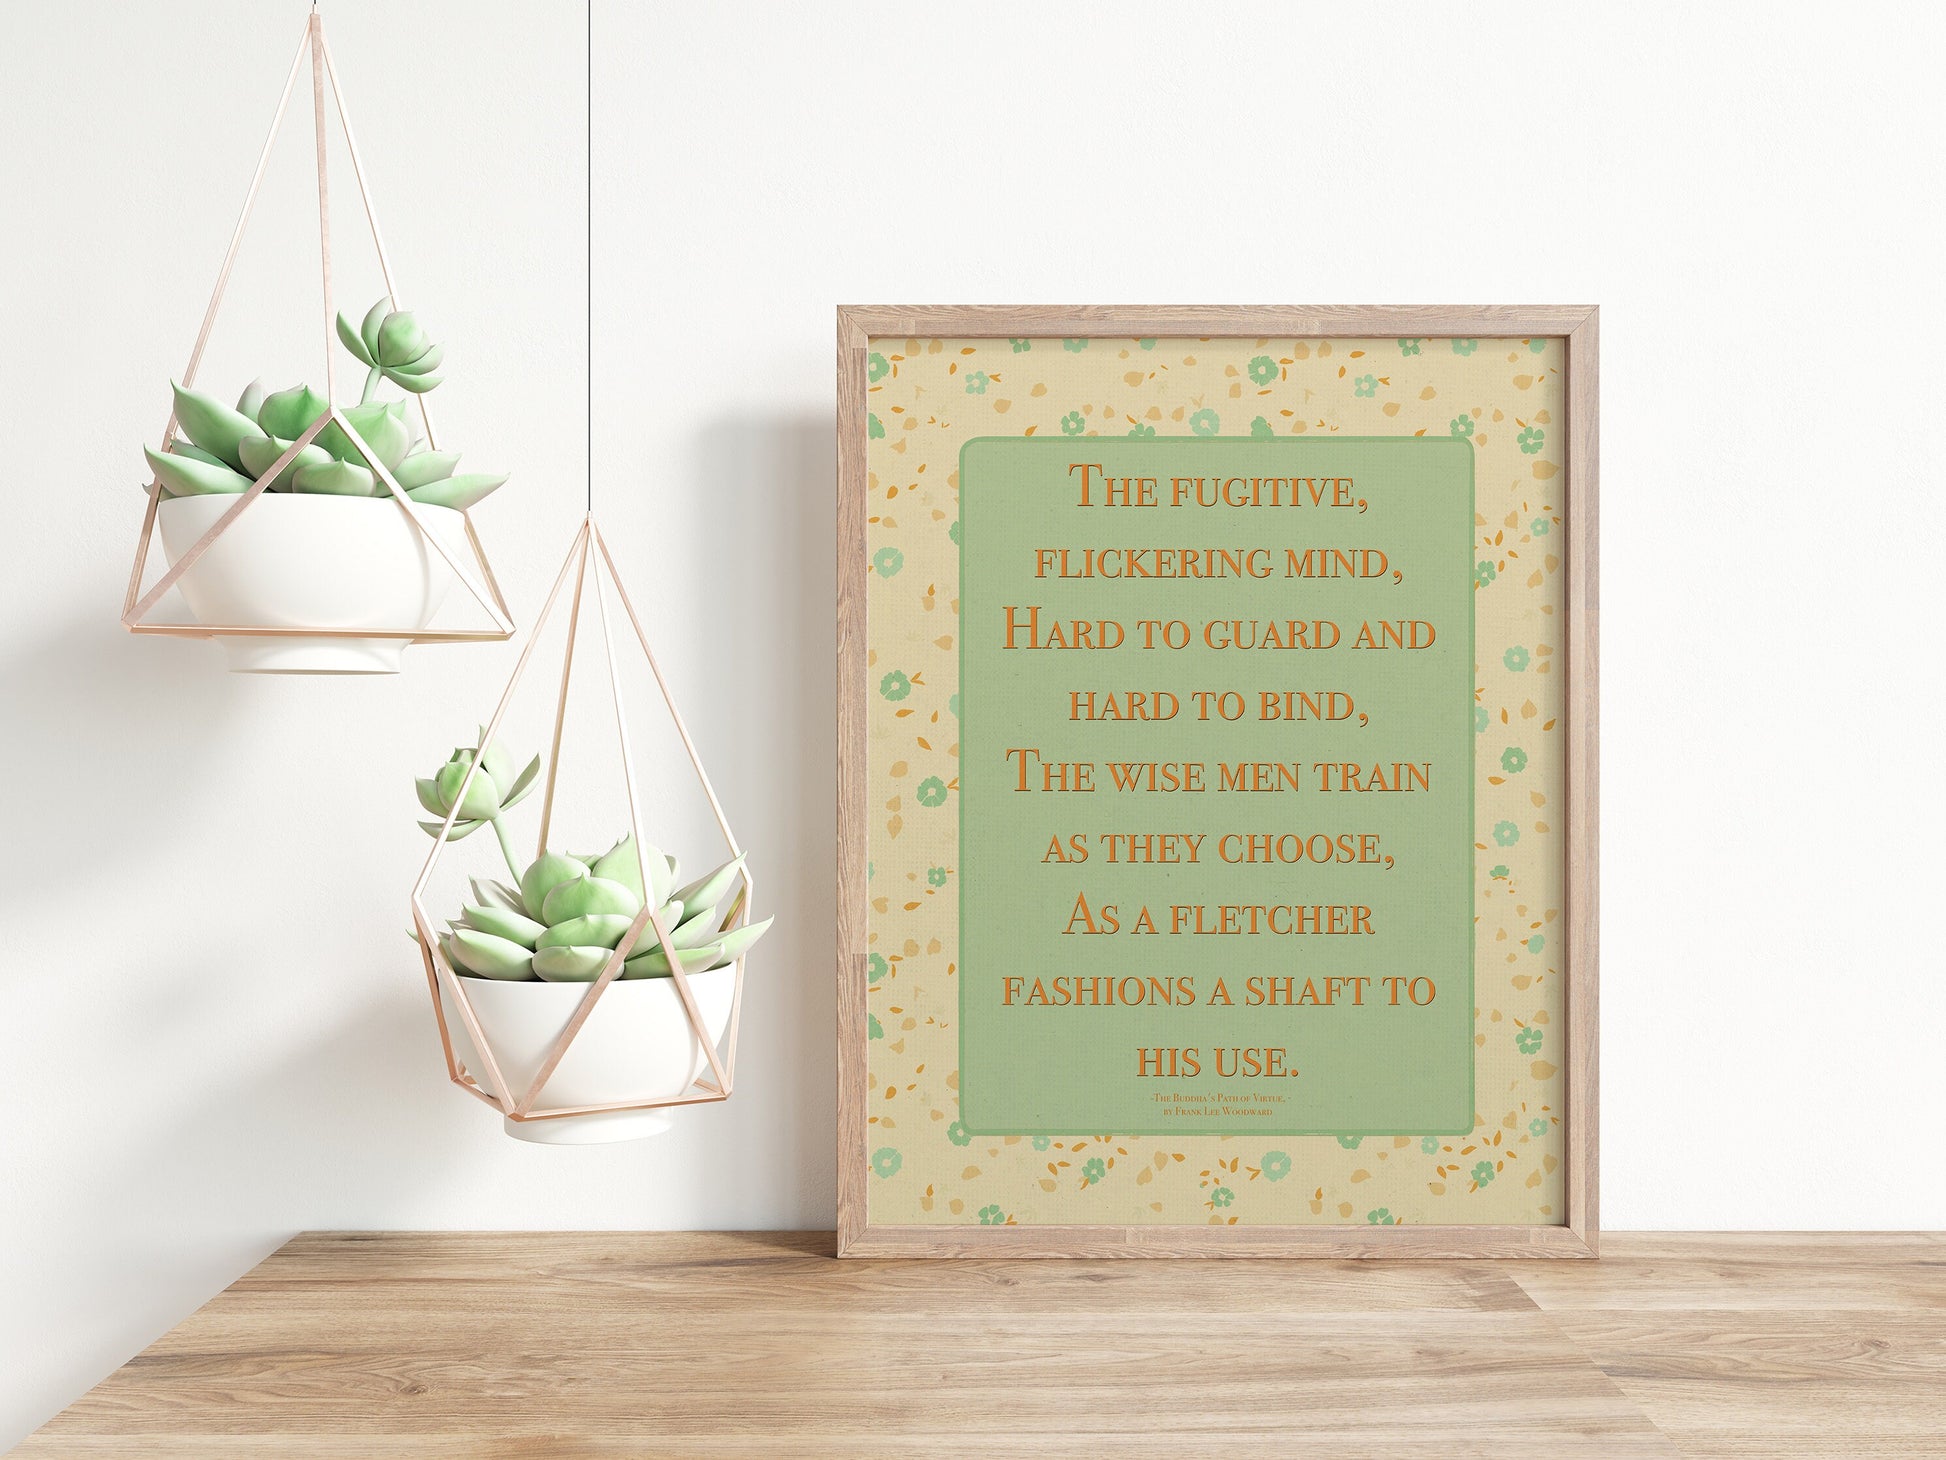 Dhammapada quote on mind poster in pastel colors with floral design in wood frame display